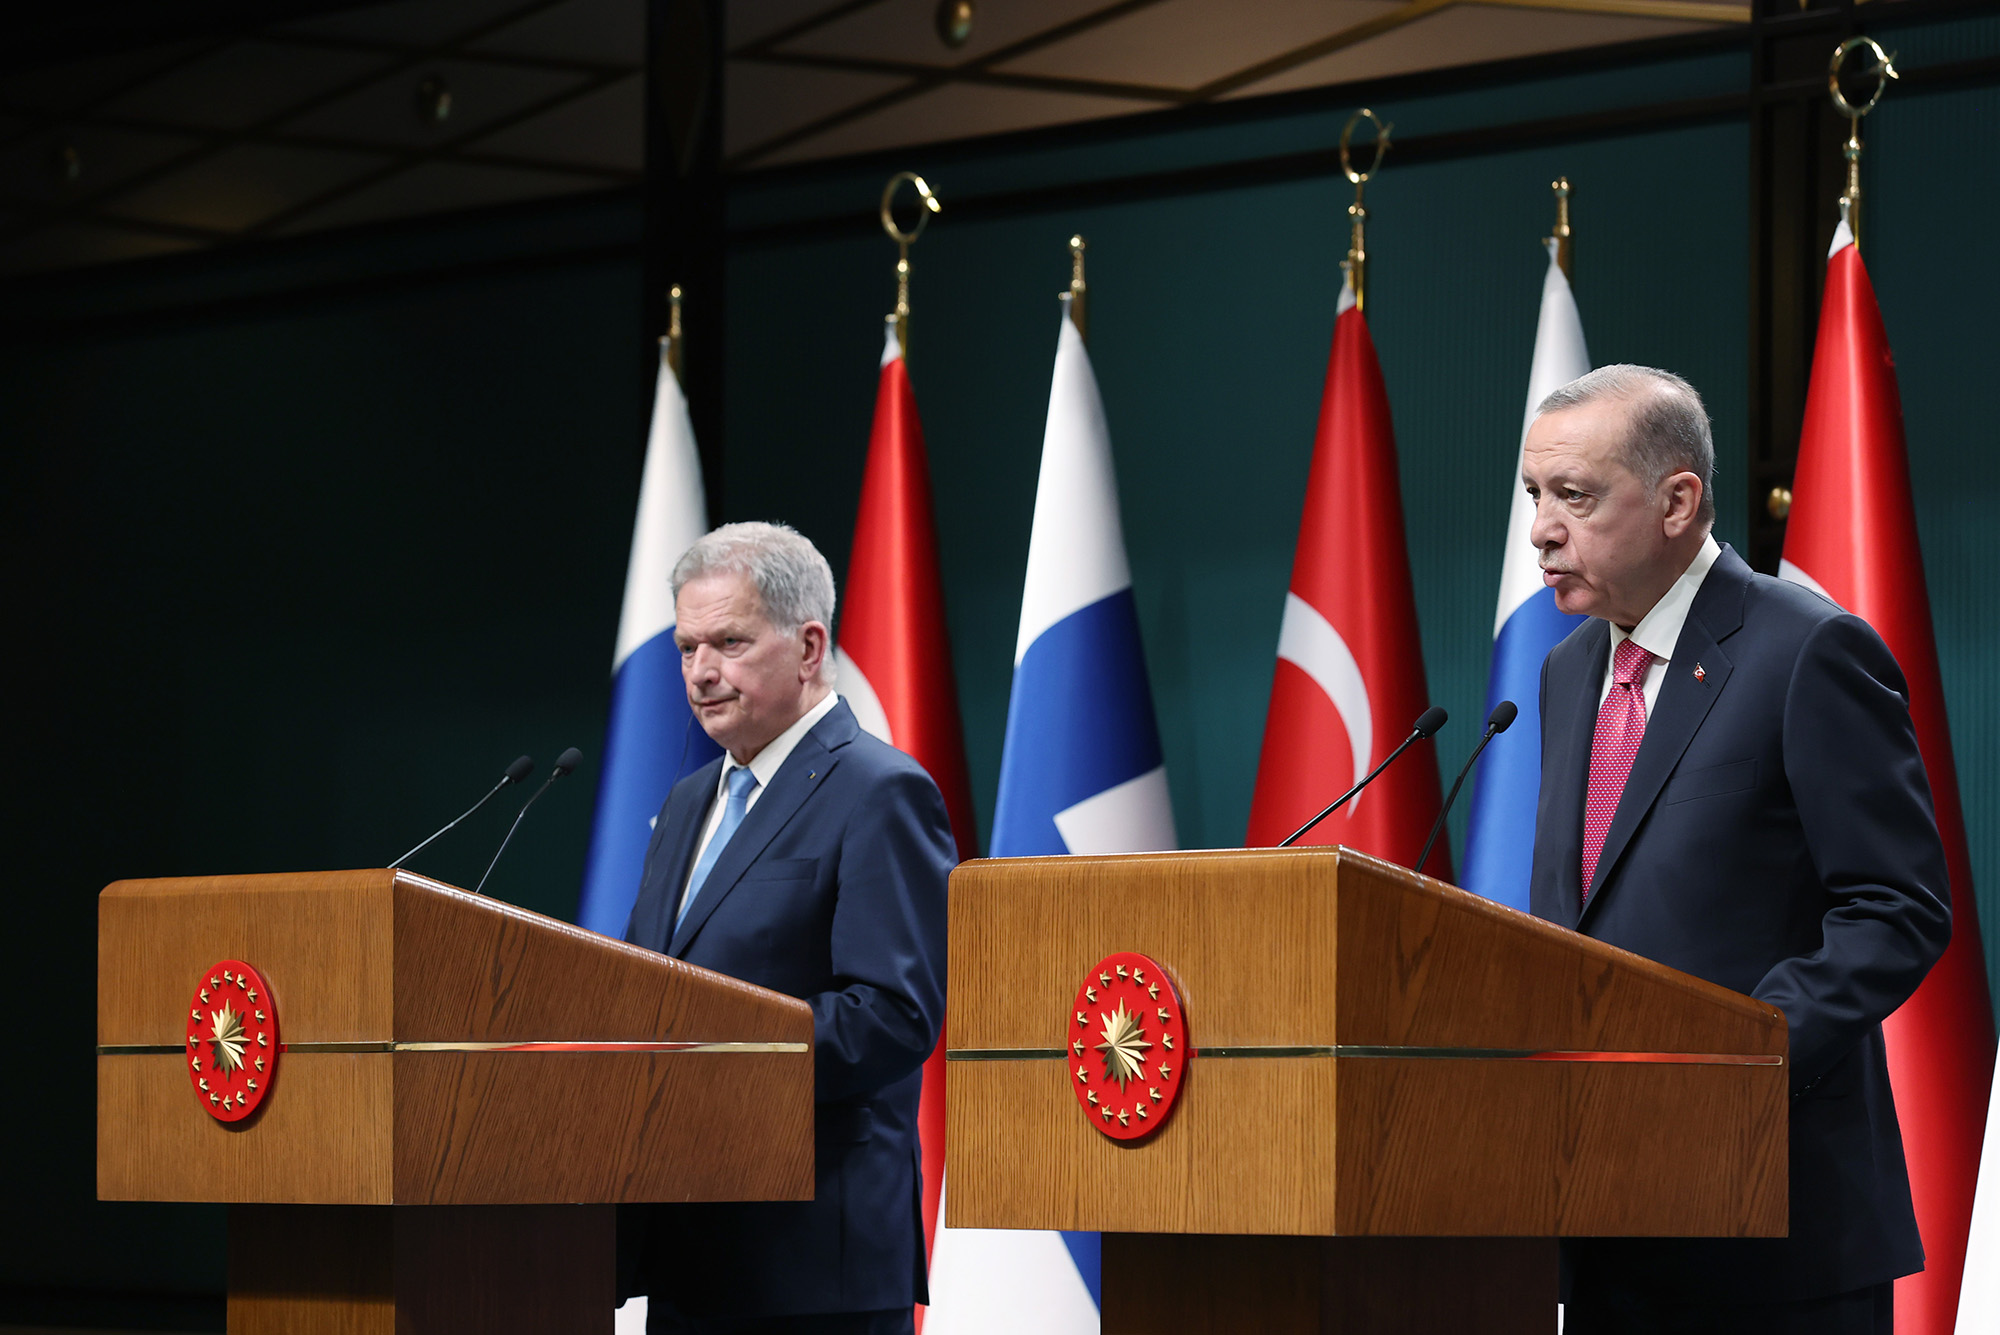 Turkish President Recep Tayyip Erdogan, right, and Finnish President Sauli Niinisto hold a joint press conference at Presidential Complex in Ankara, Turkey, on March 17.